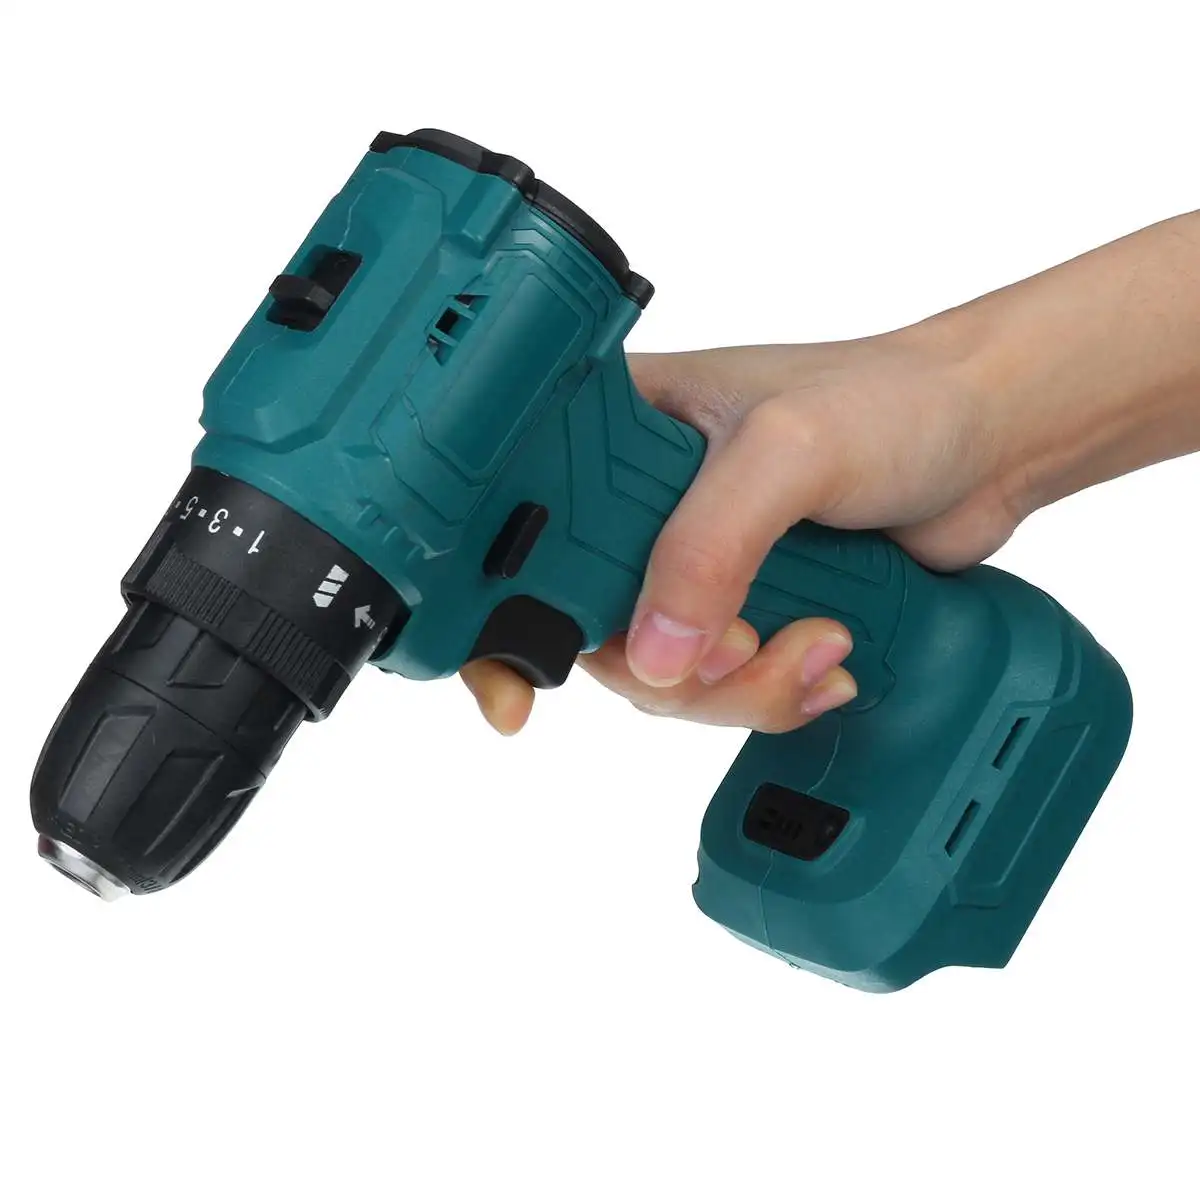 

18V 21V 350Nm 13mm 10mm Brushless Electric Drill with LED Rechargable Cordless Drill Screwdriver Power Tool for Makita Battery